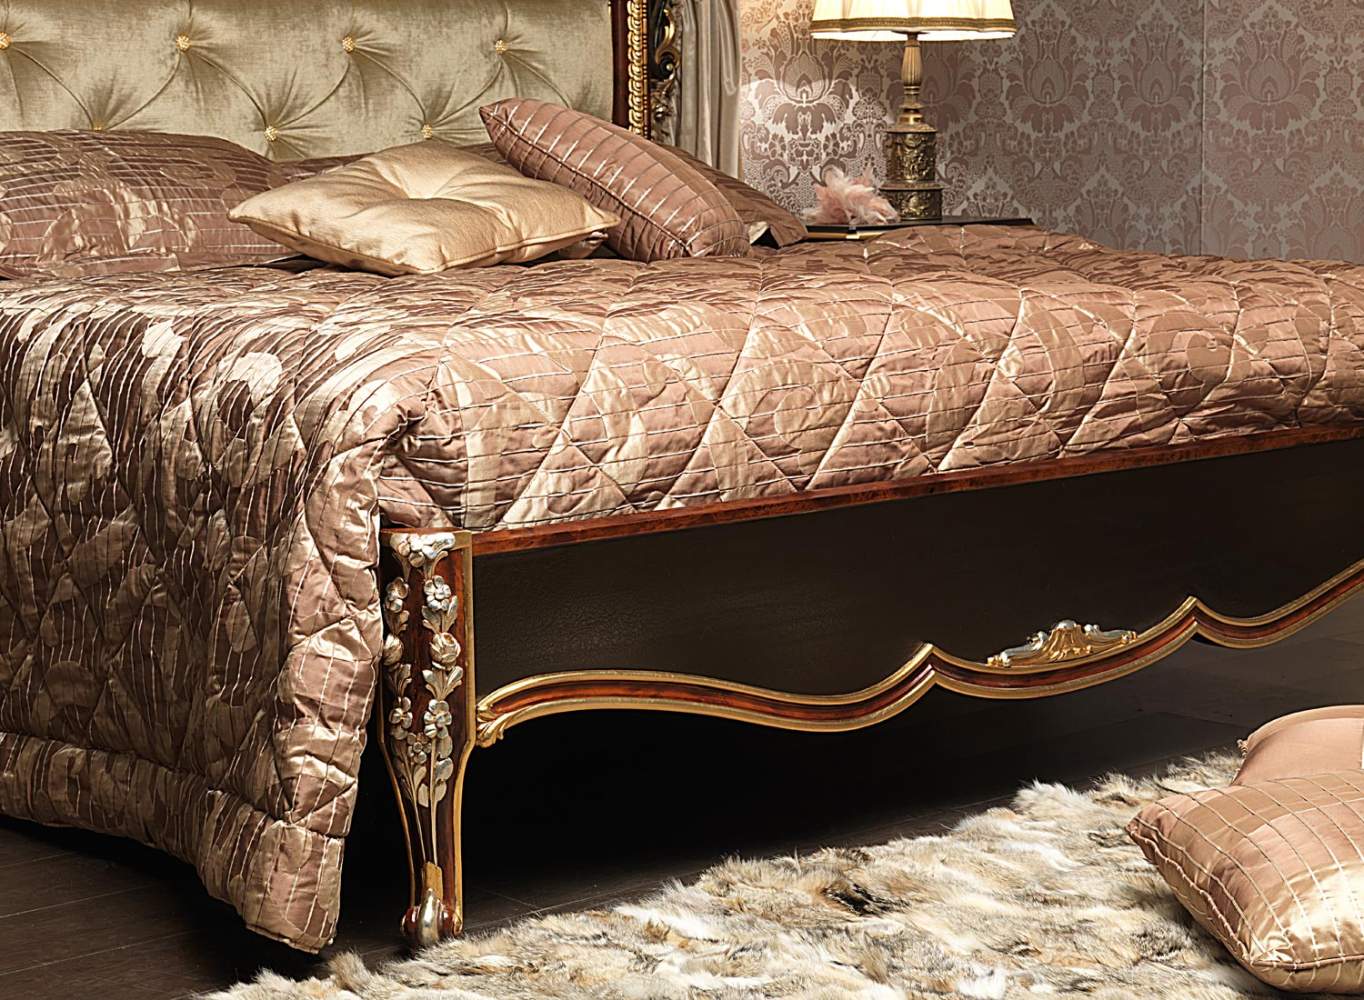 Classic Emperador Black bedroom, carved bed with floral carvings